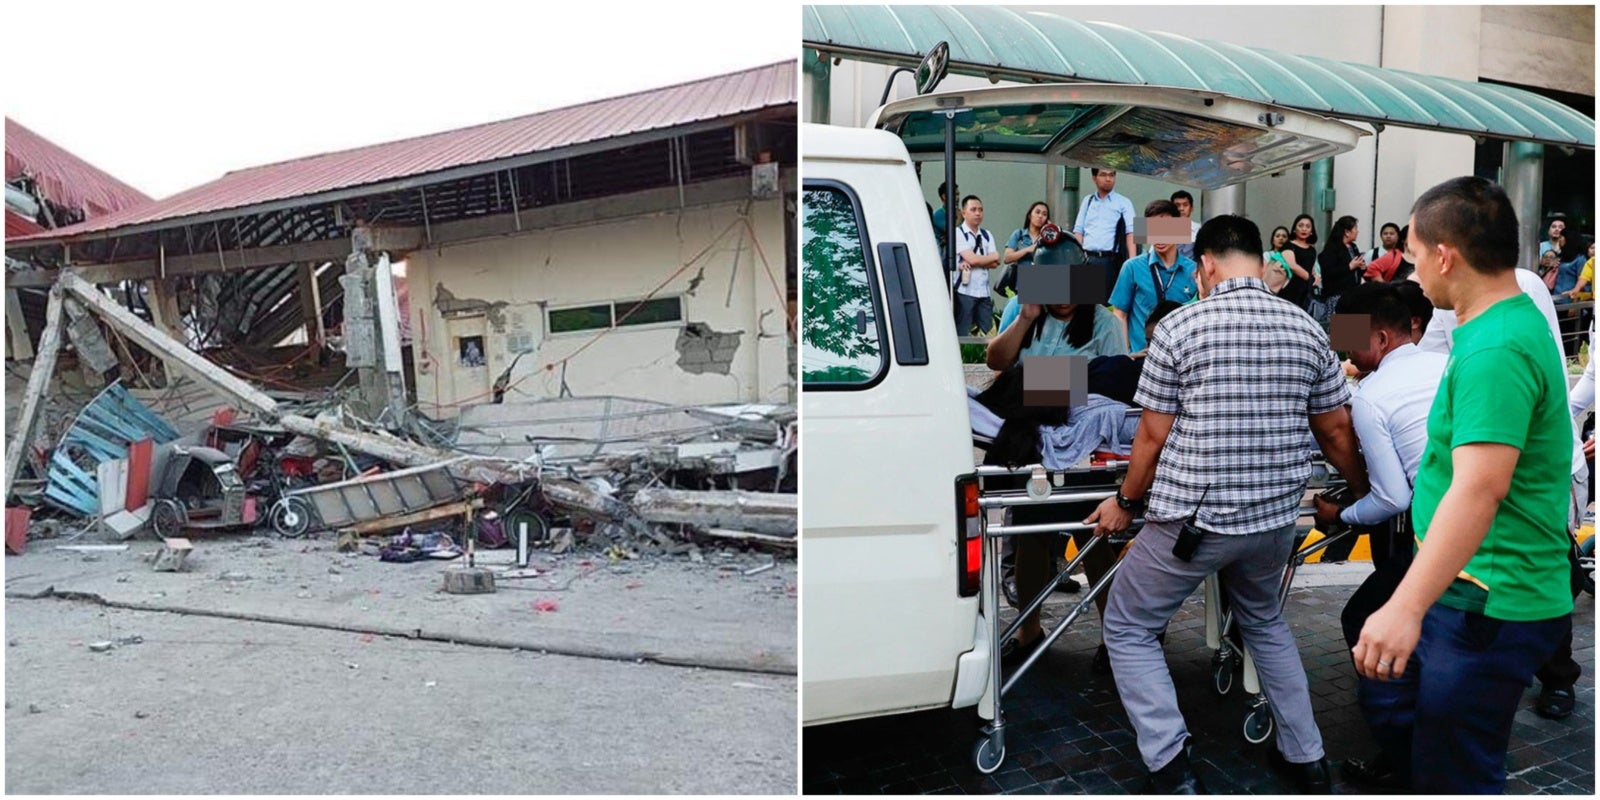 Philippines Struck By Magnitude 6.1 Earthquake, Killing At Least 8 And Injuring 20 - World Of Buzz